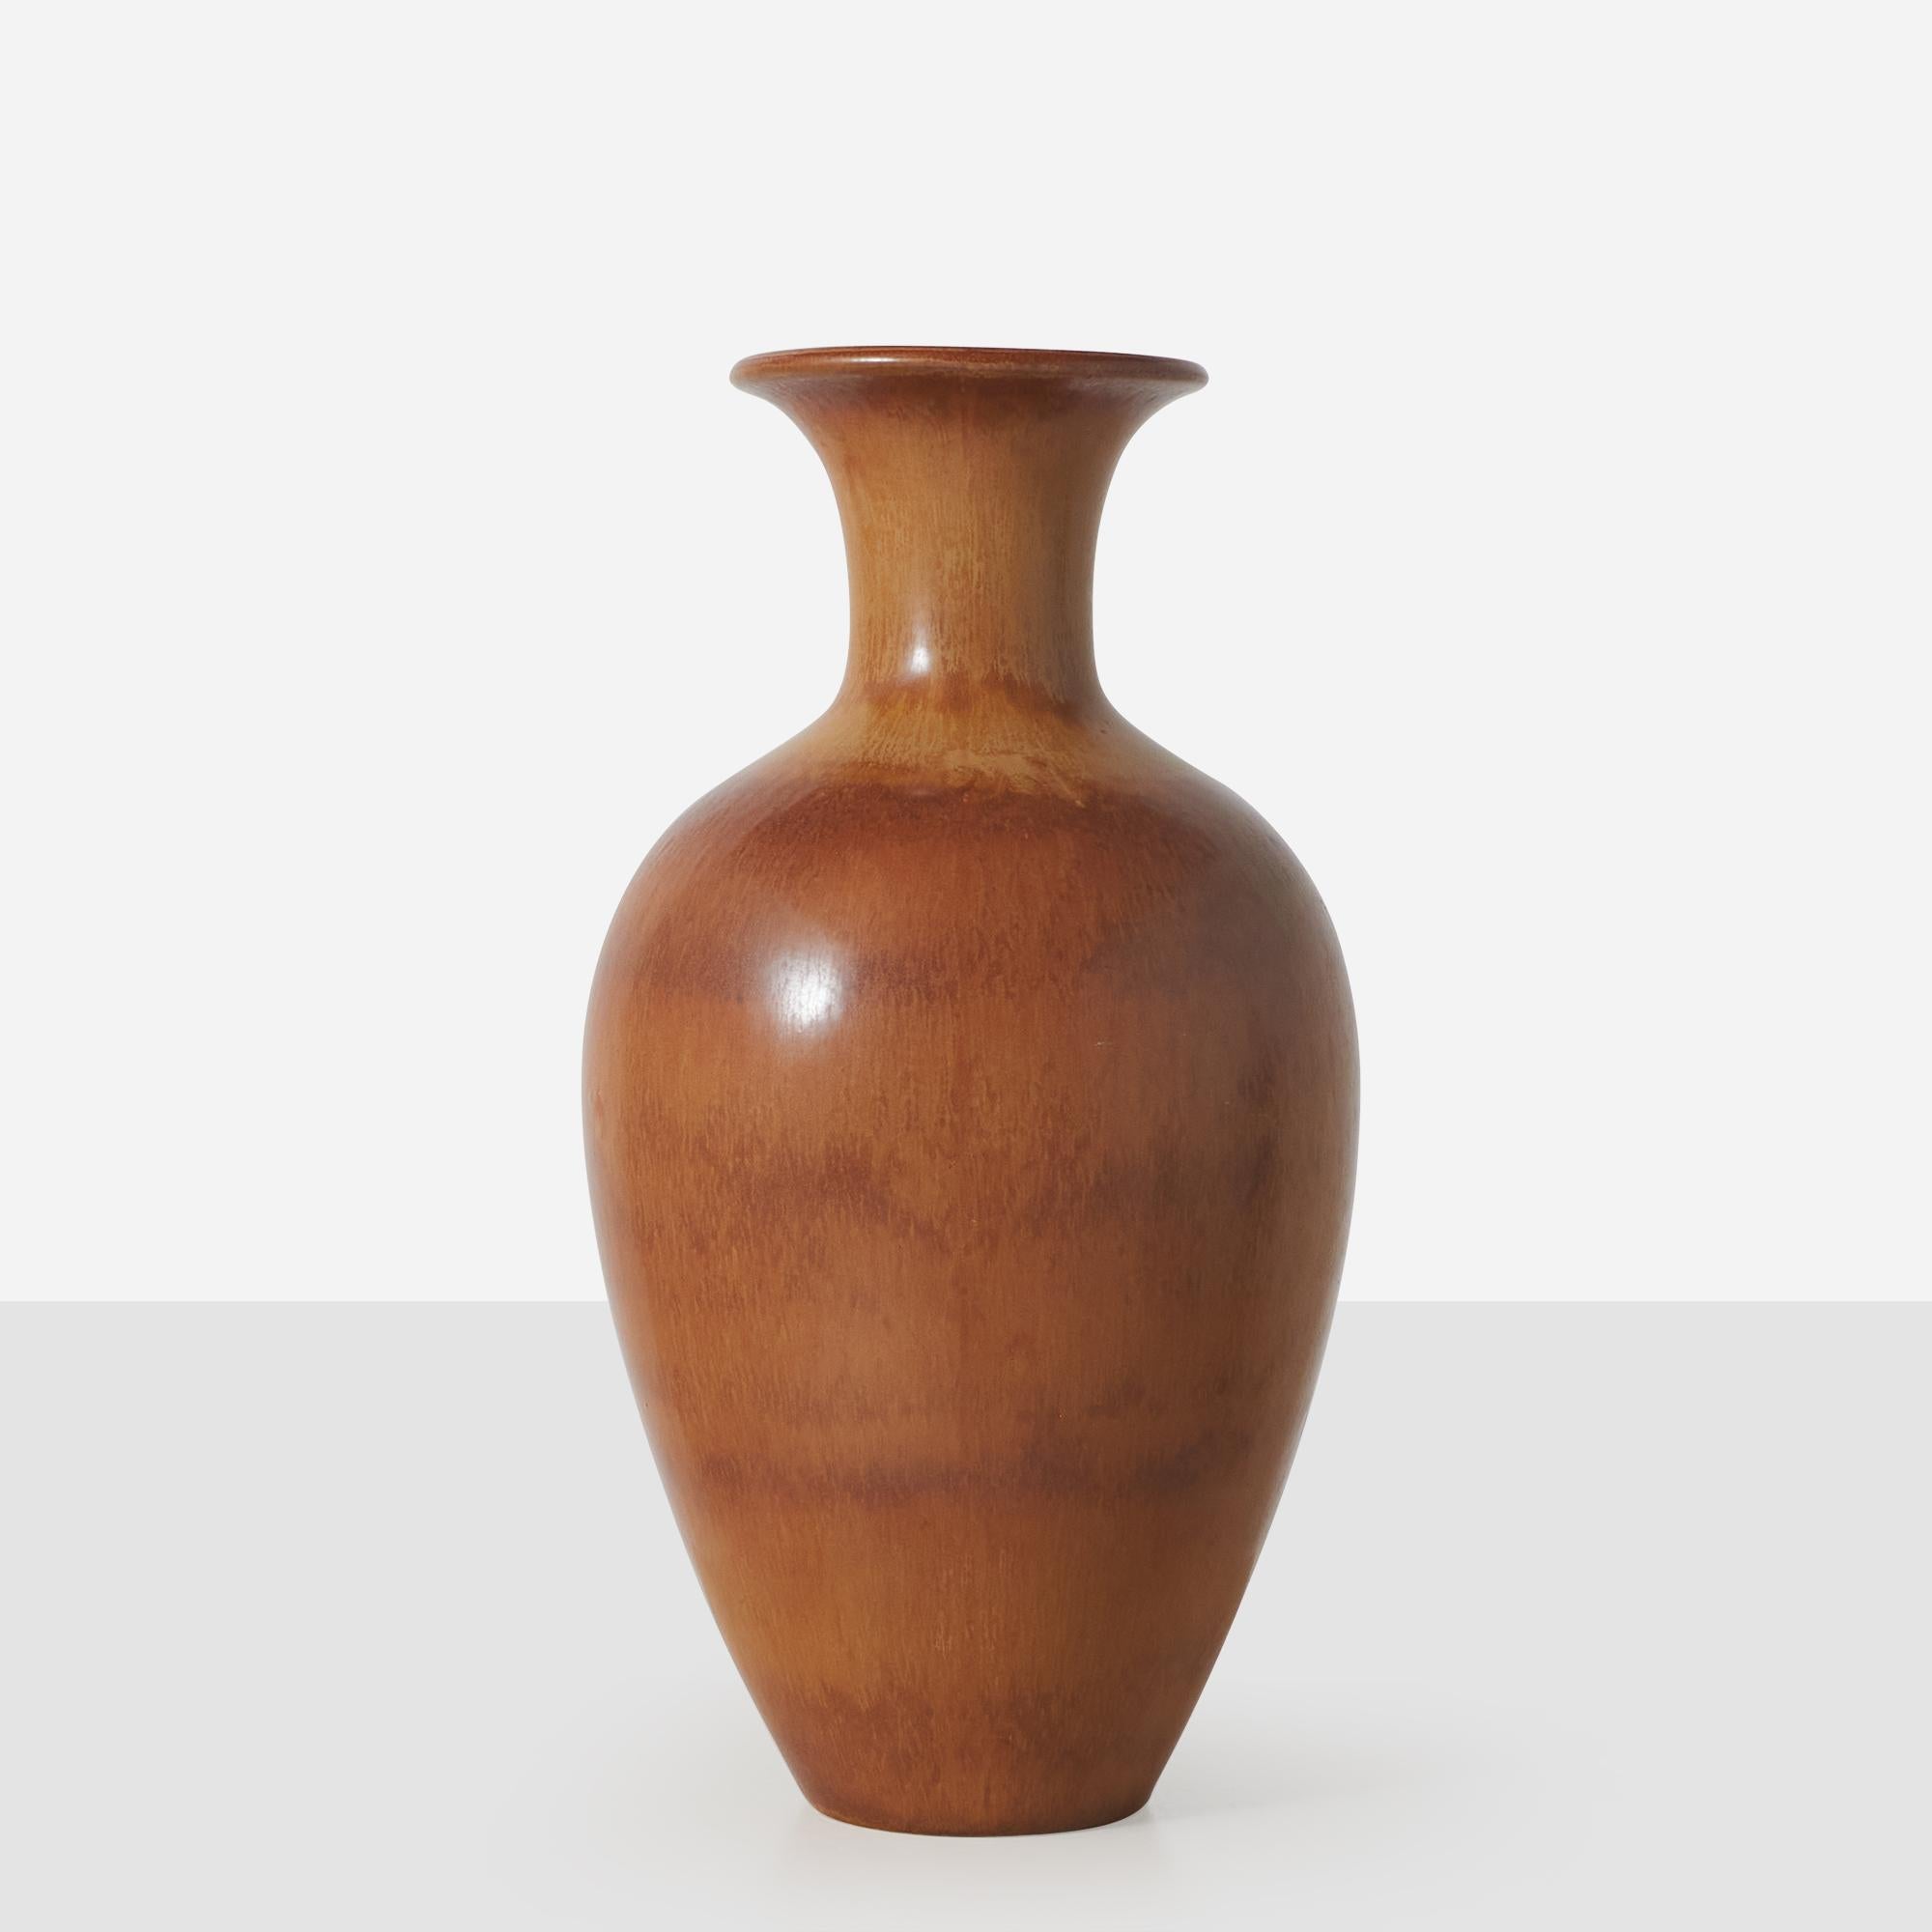 A brown, ochre, and auburn hare's fur glaze ceramic vase by Gunnar Nylund for Rorstrand. Signature and Studio mark to to bottom. Several firing marks are present. 